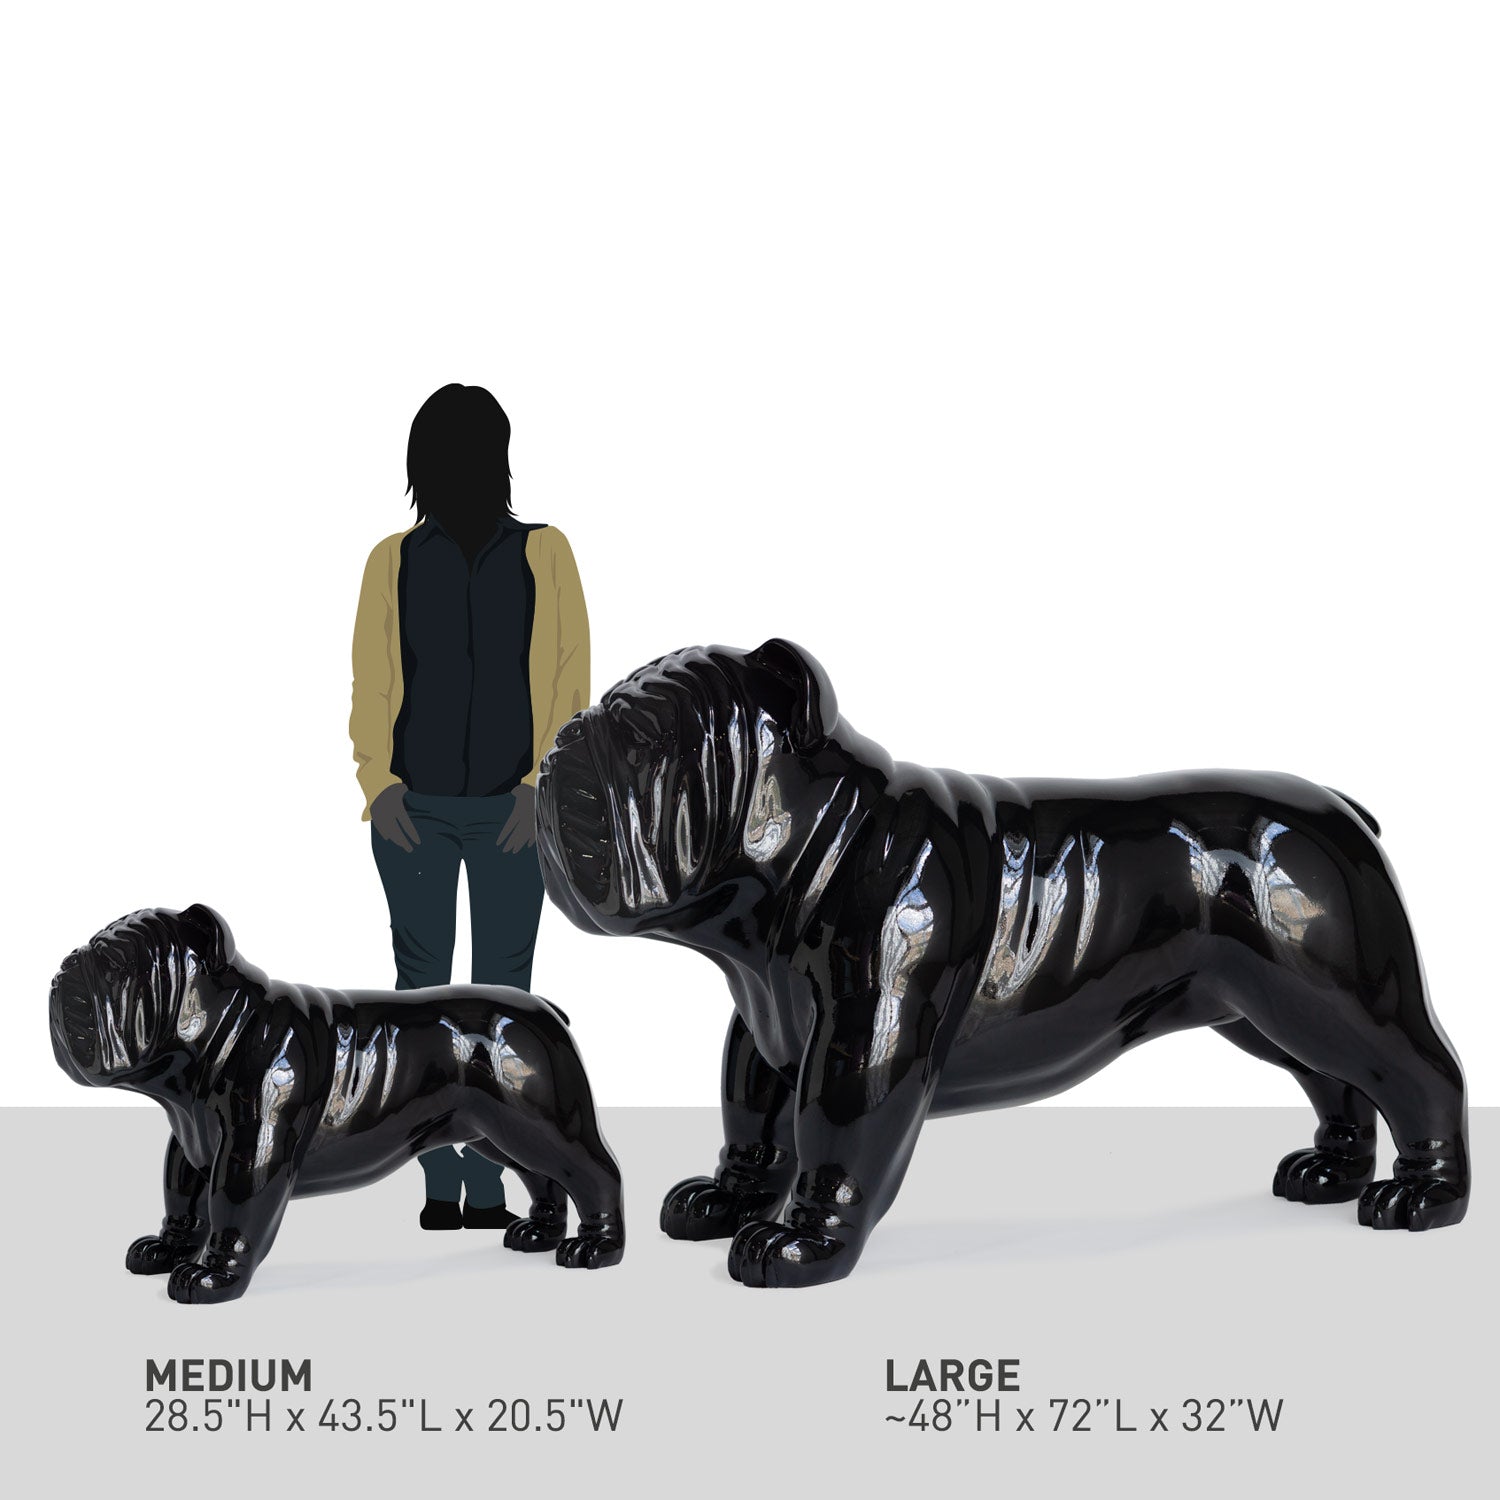 Diagram showing the size comparison of a medium and a large glossy black bulldog sculpture in comparison to a silhouette of a US-average-sized woman.